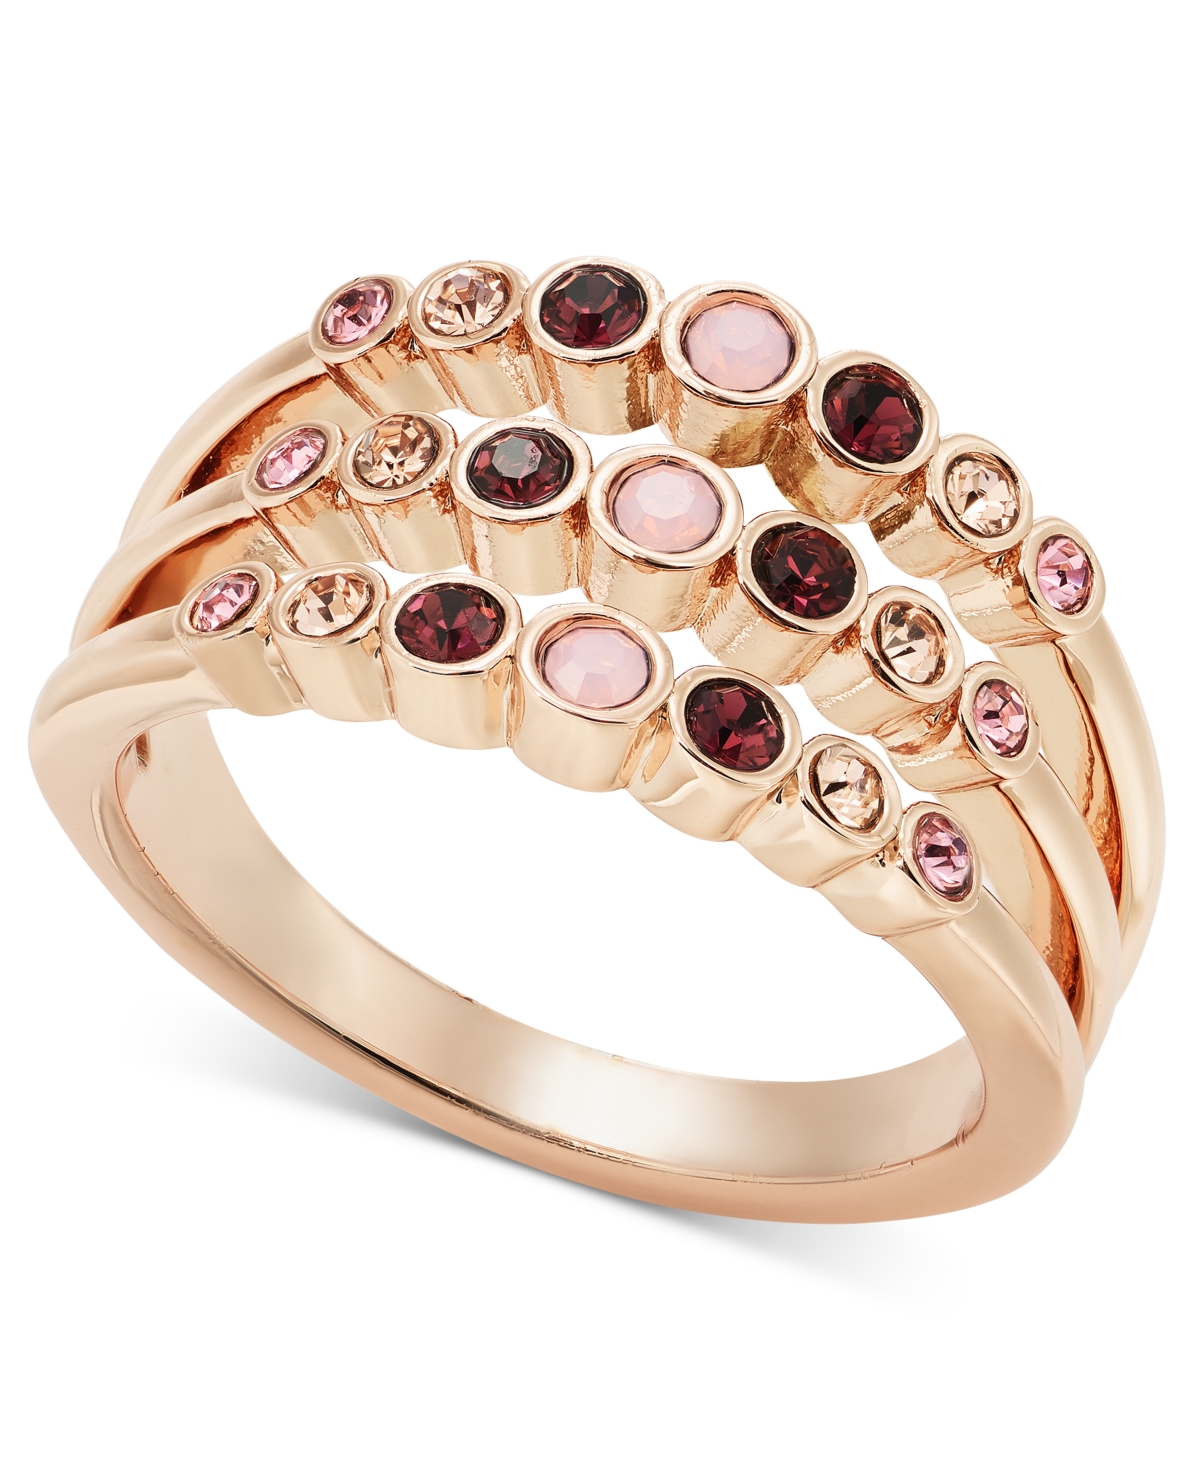 Rose Gold-Tone Tonal Crystal Triple-Row Ring, Created for Macy's - Rose Gold